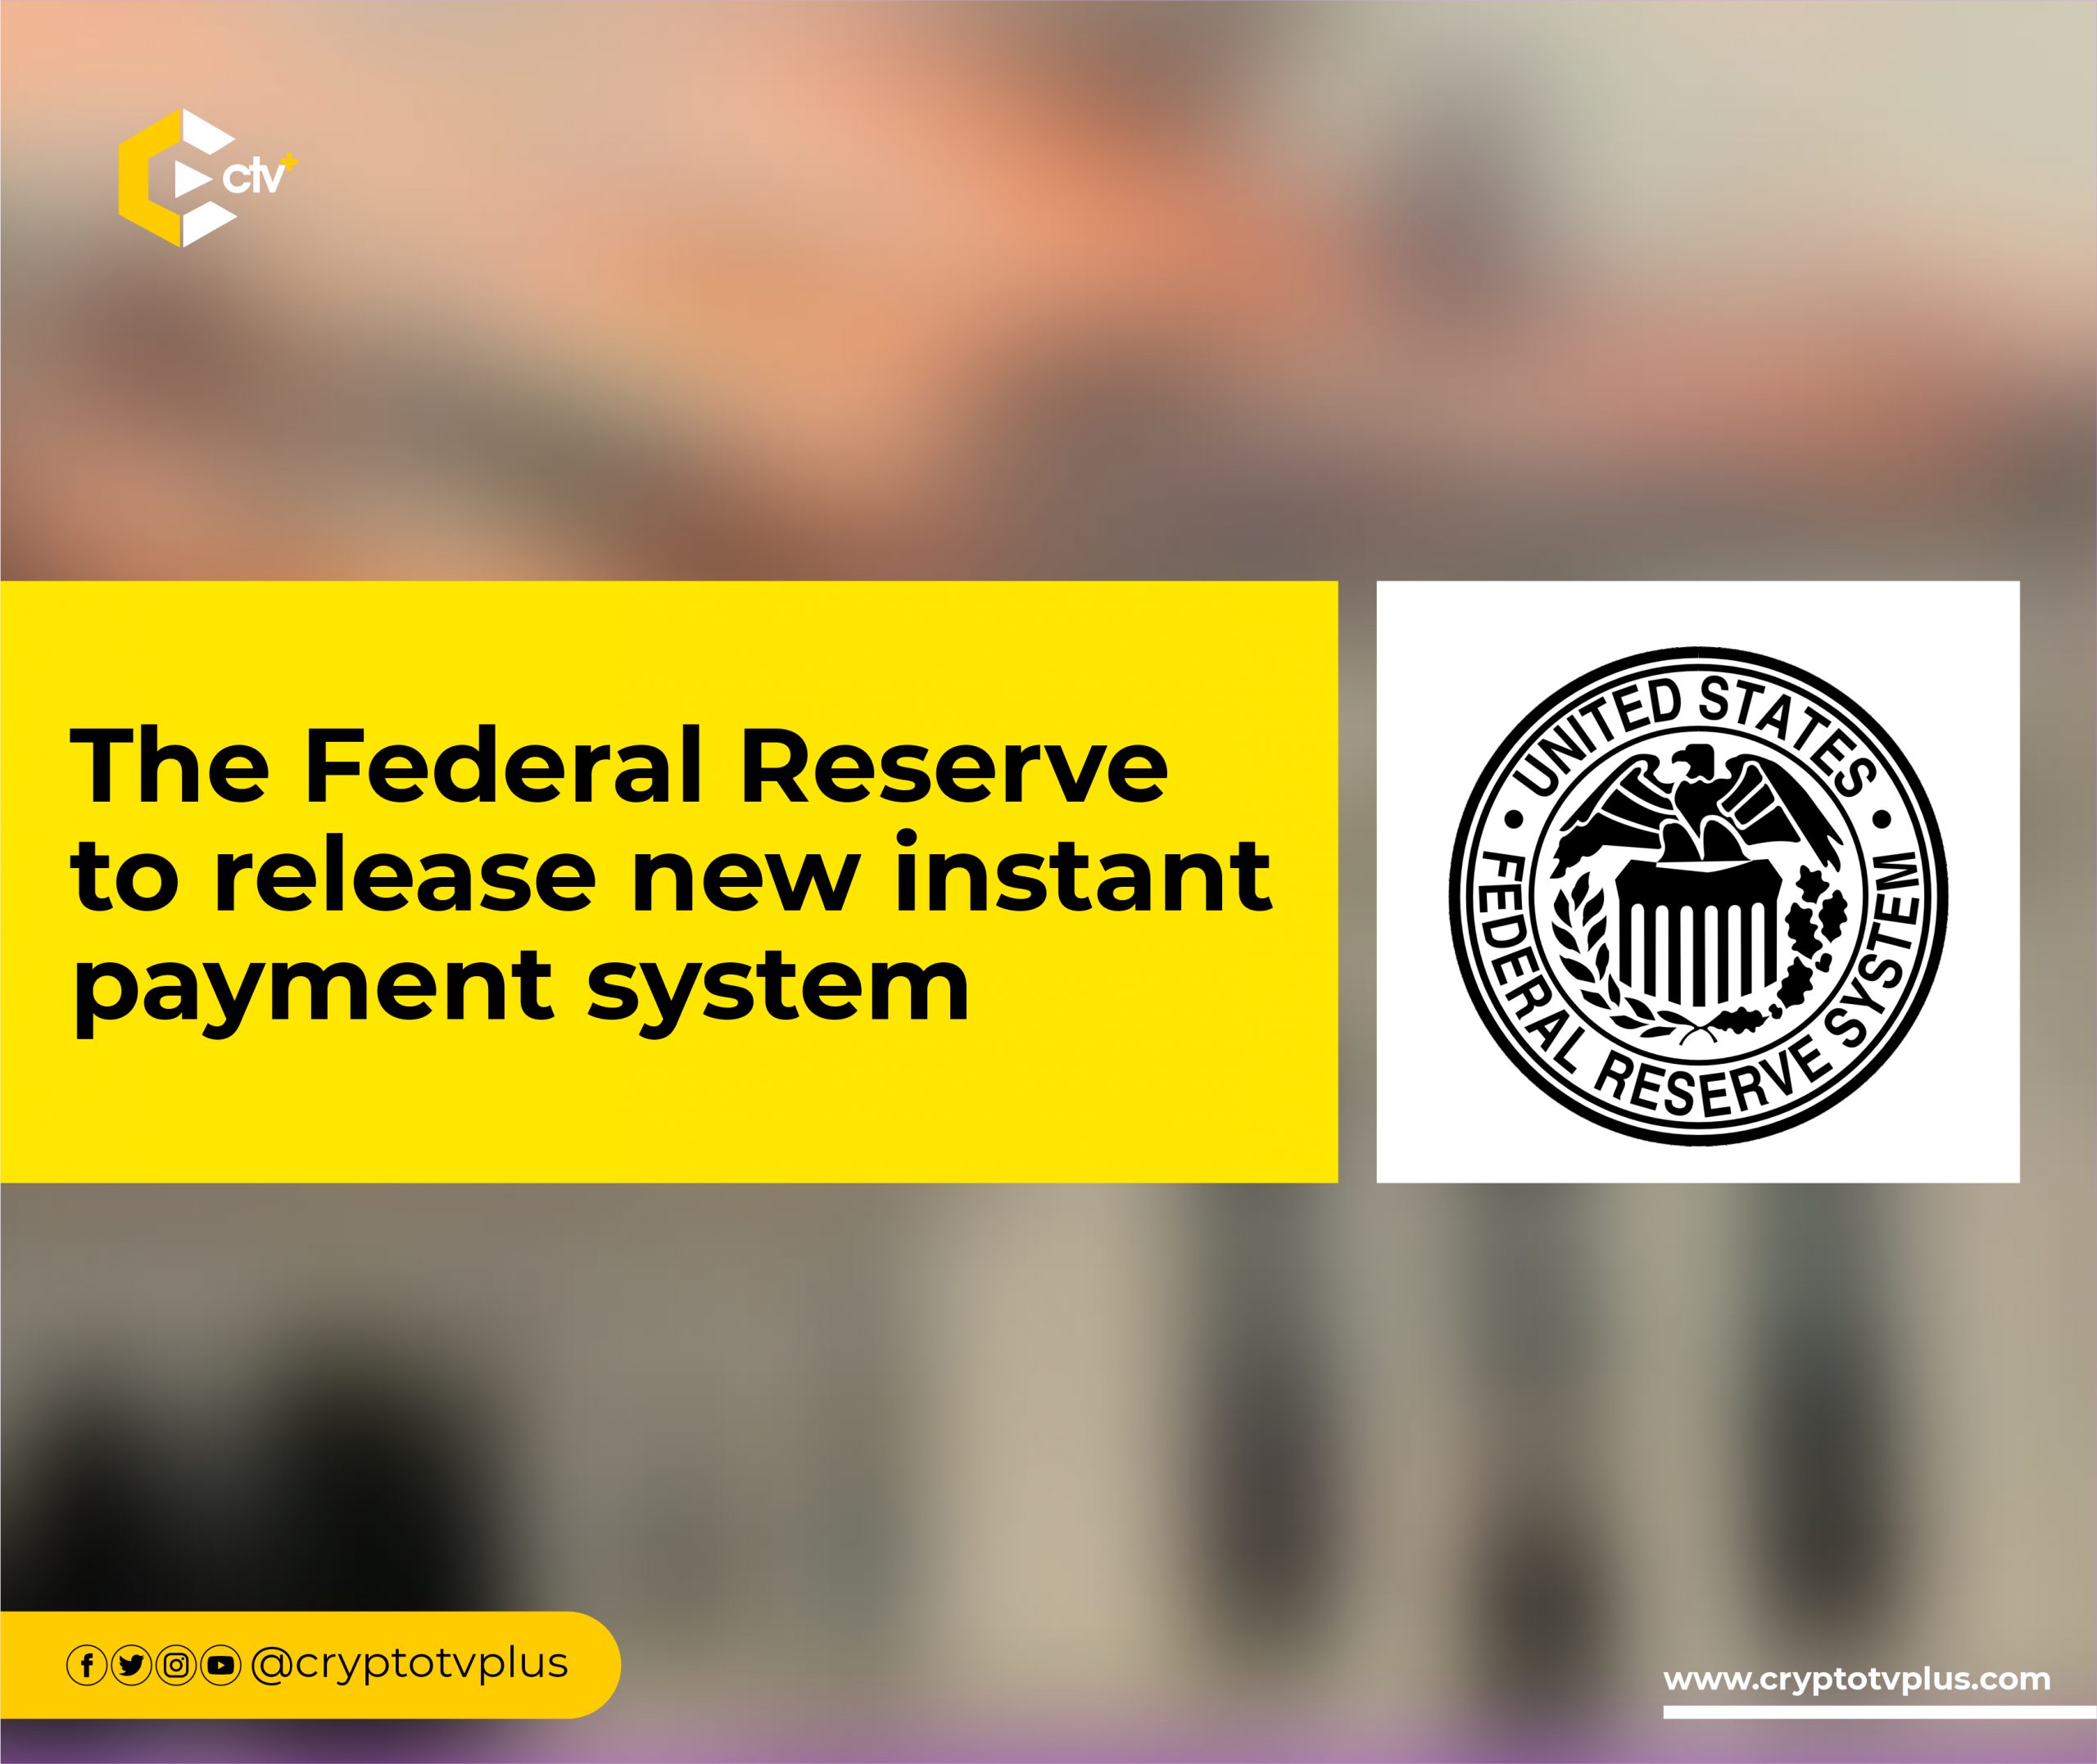 The Federal Reserve to release new instant payment system | CryptoTvplus: DeFi, NFT, Bitcoin, Ethereum Altcoin, Cryptocurrency & Blockchain Research, Shows